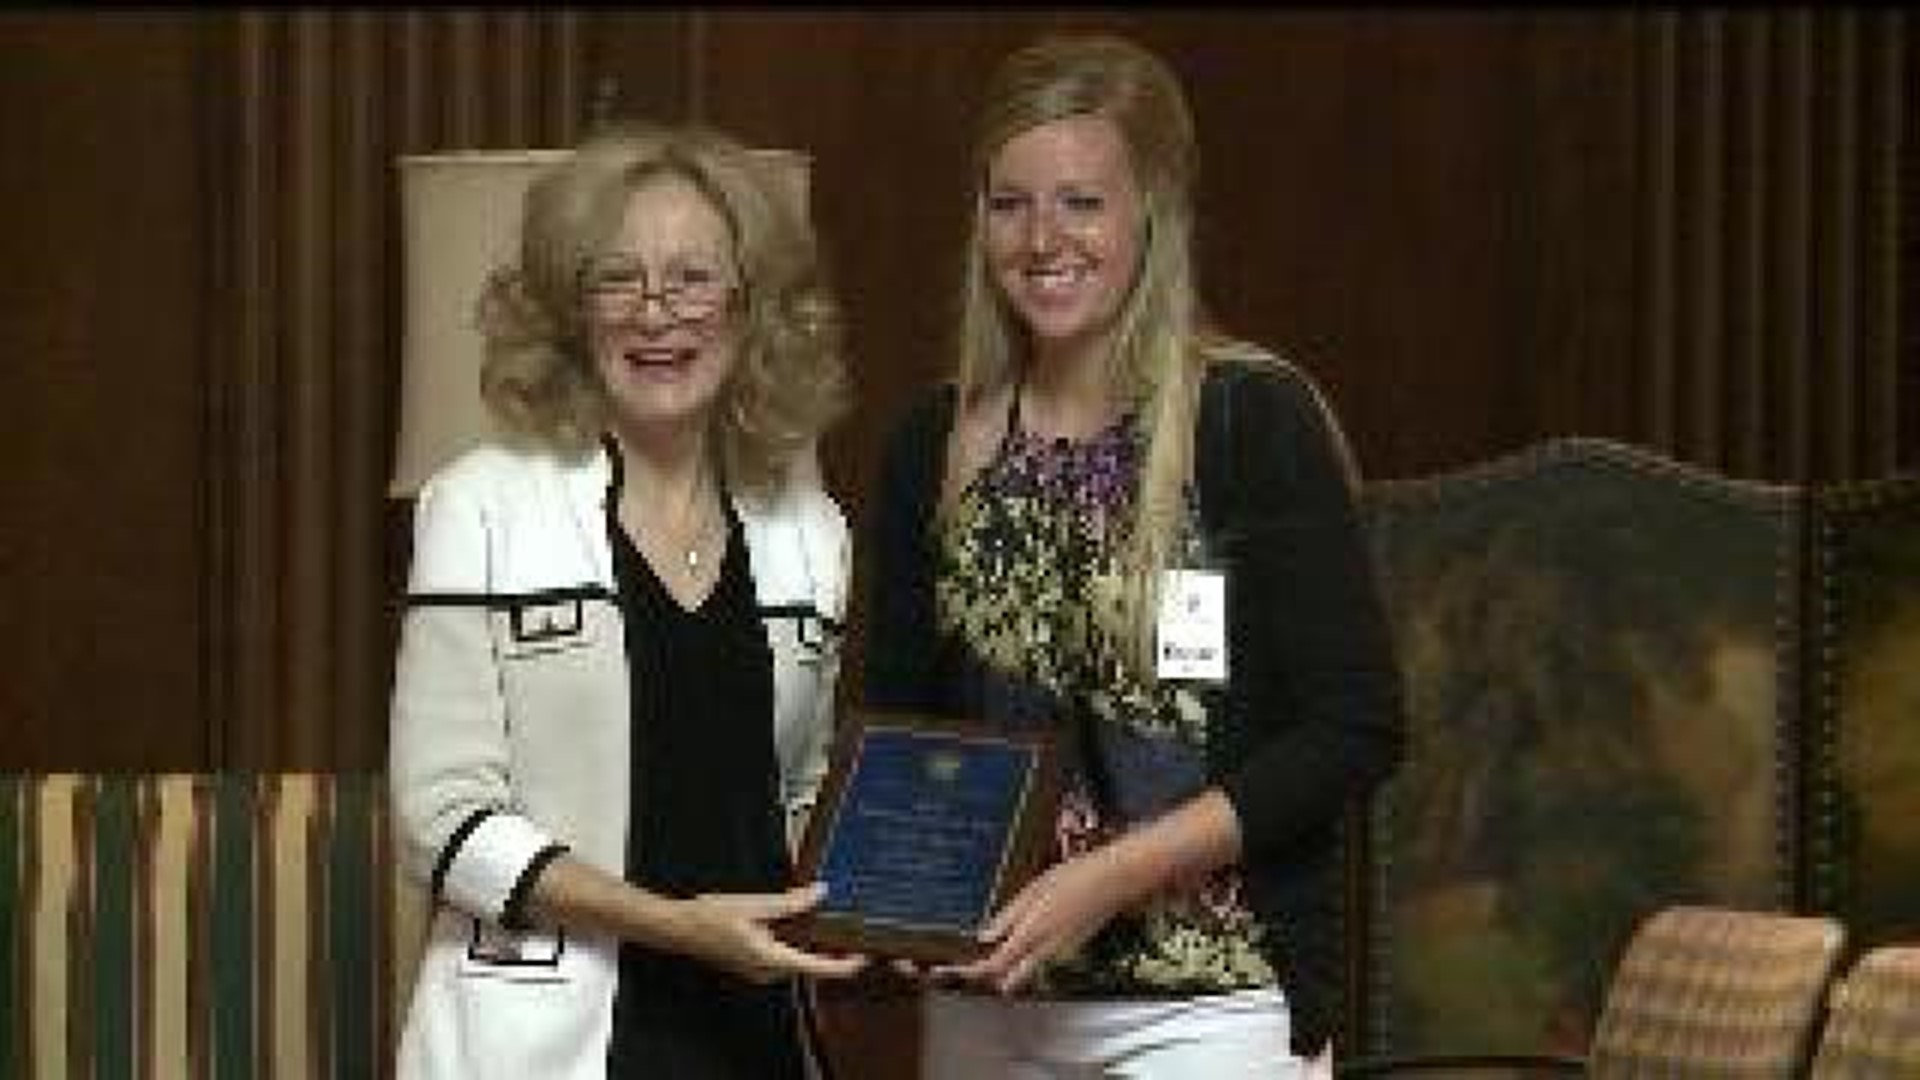 Rock Island college student receives Fraternalist of the Year award